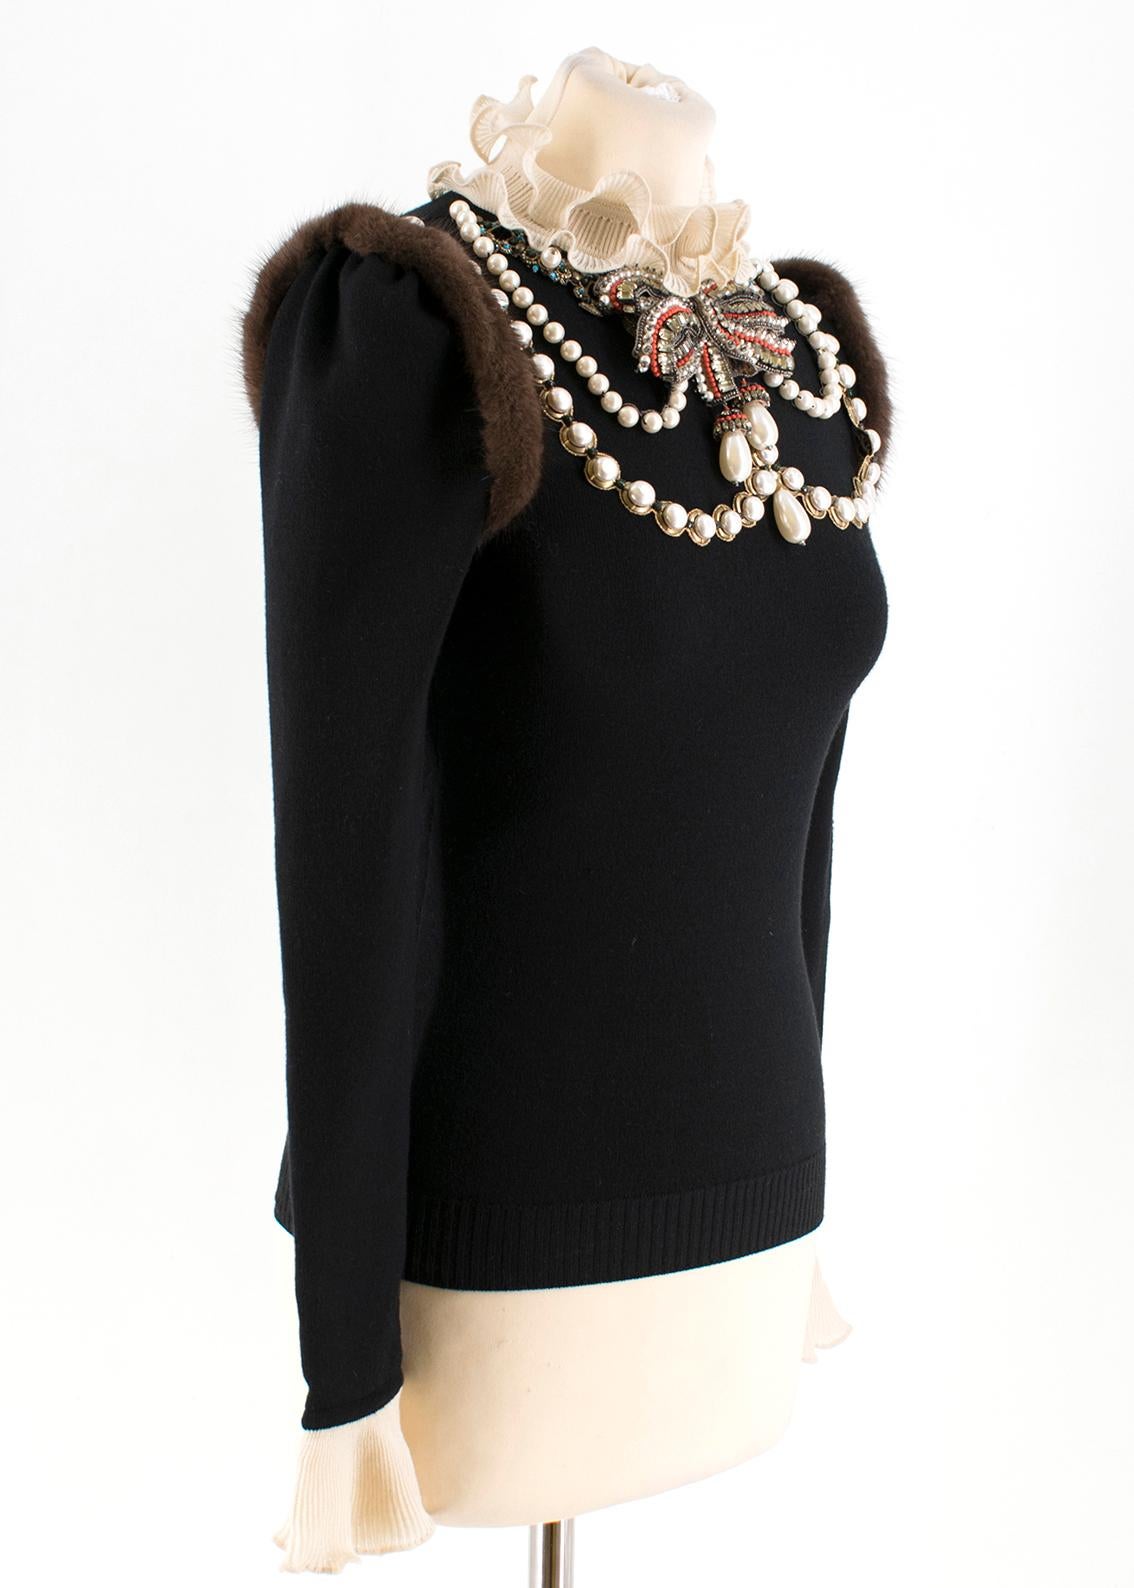 Gucci Embroidered Wool Knit Top with Mink Fur 

- Decorative Black Long Sleeve Knit Top 
- Layered necklace appliquÃ© 
crystals, glass pearls and velvet detail 
- Handmade embroidery with ruffled collar and cuffs
- Black fine stretch merino wool